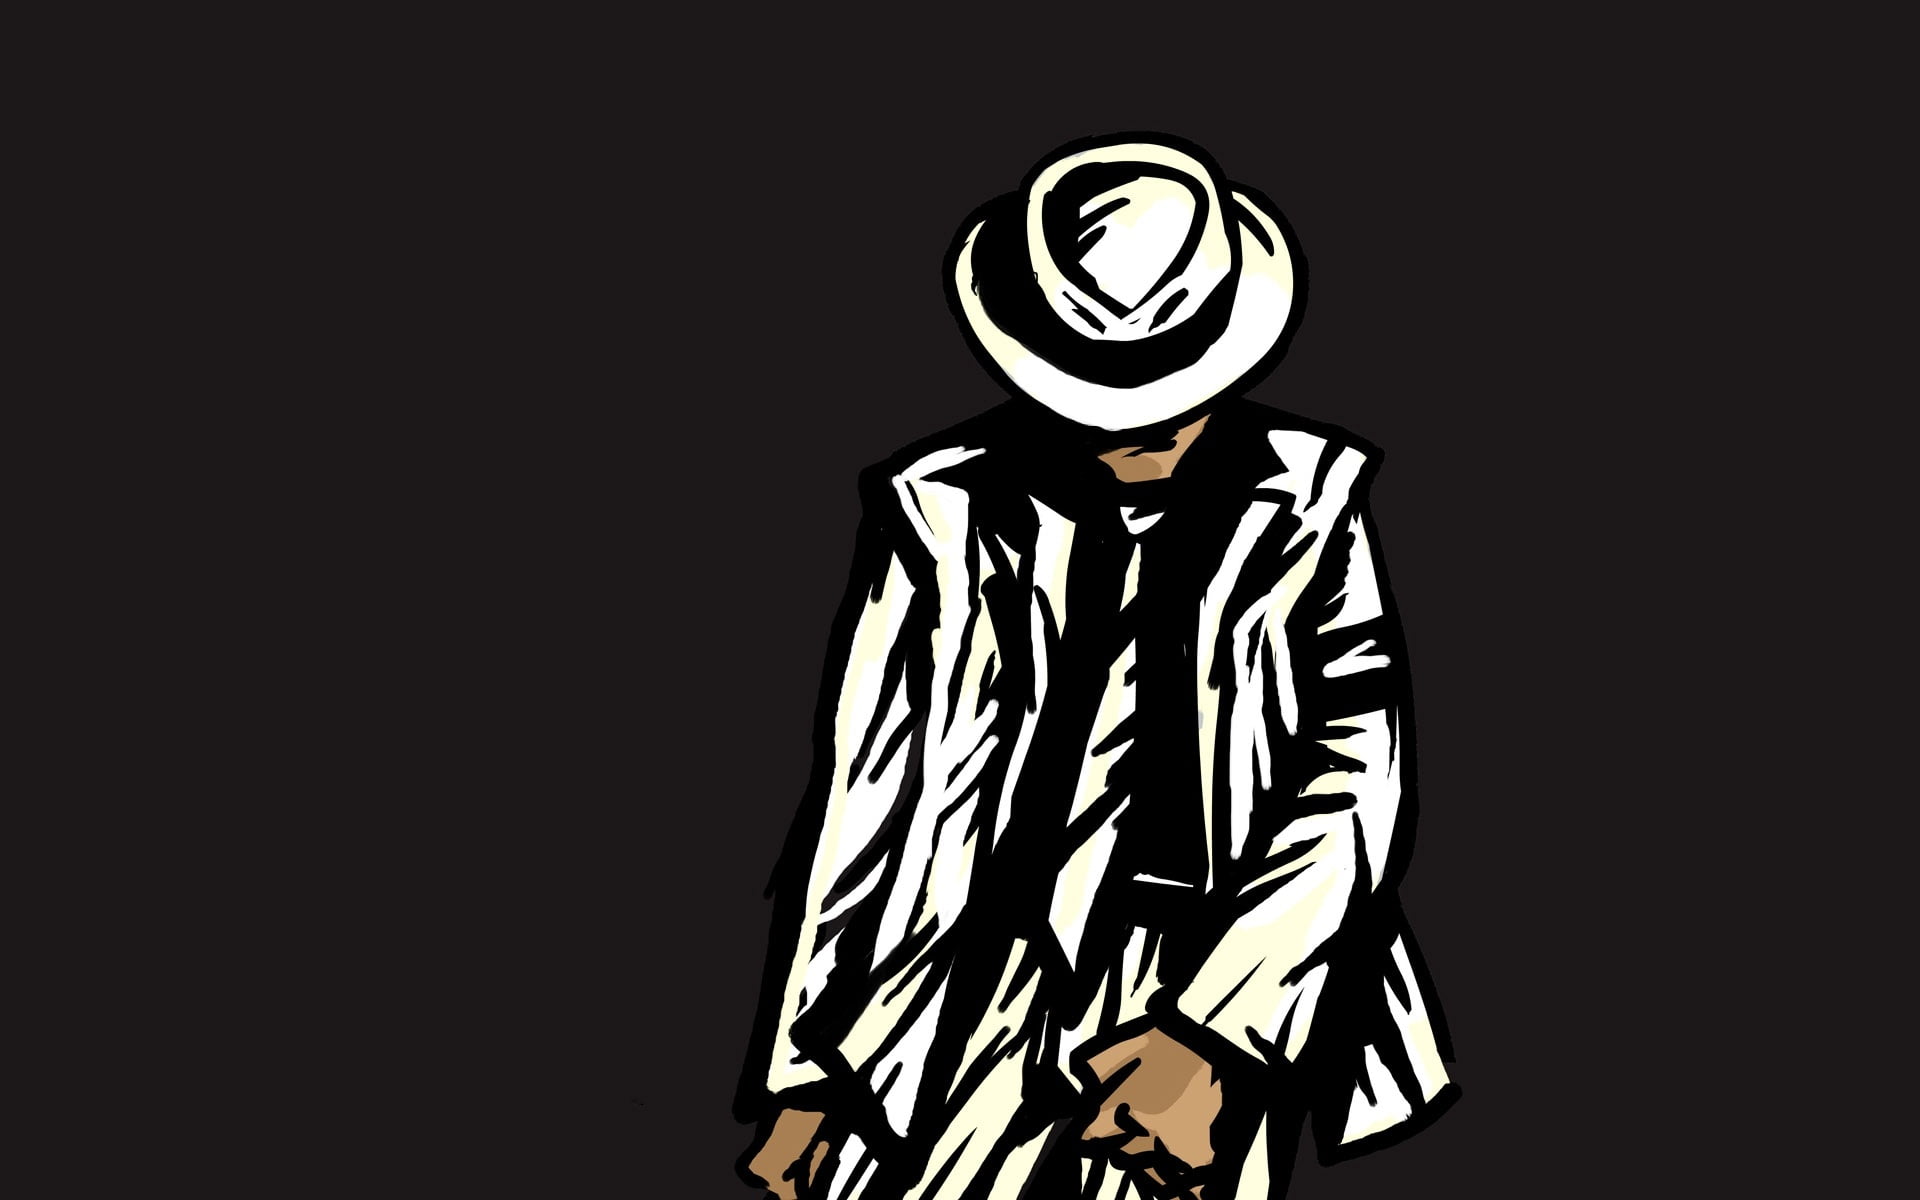 The Best Of Michael Jackson, person wearing white suit cartoon clip art